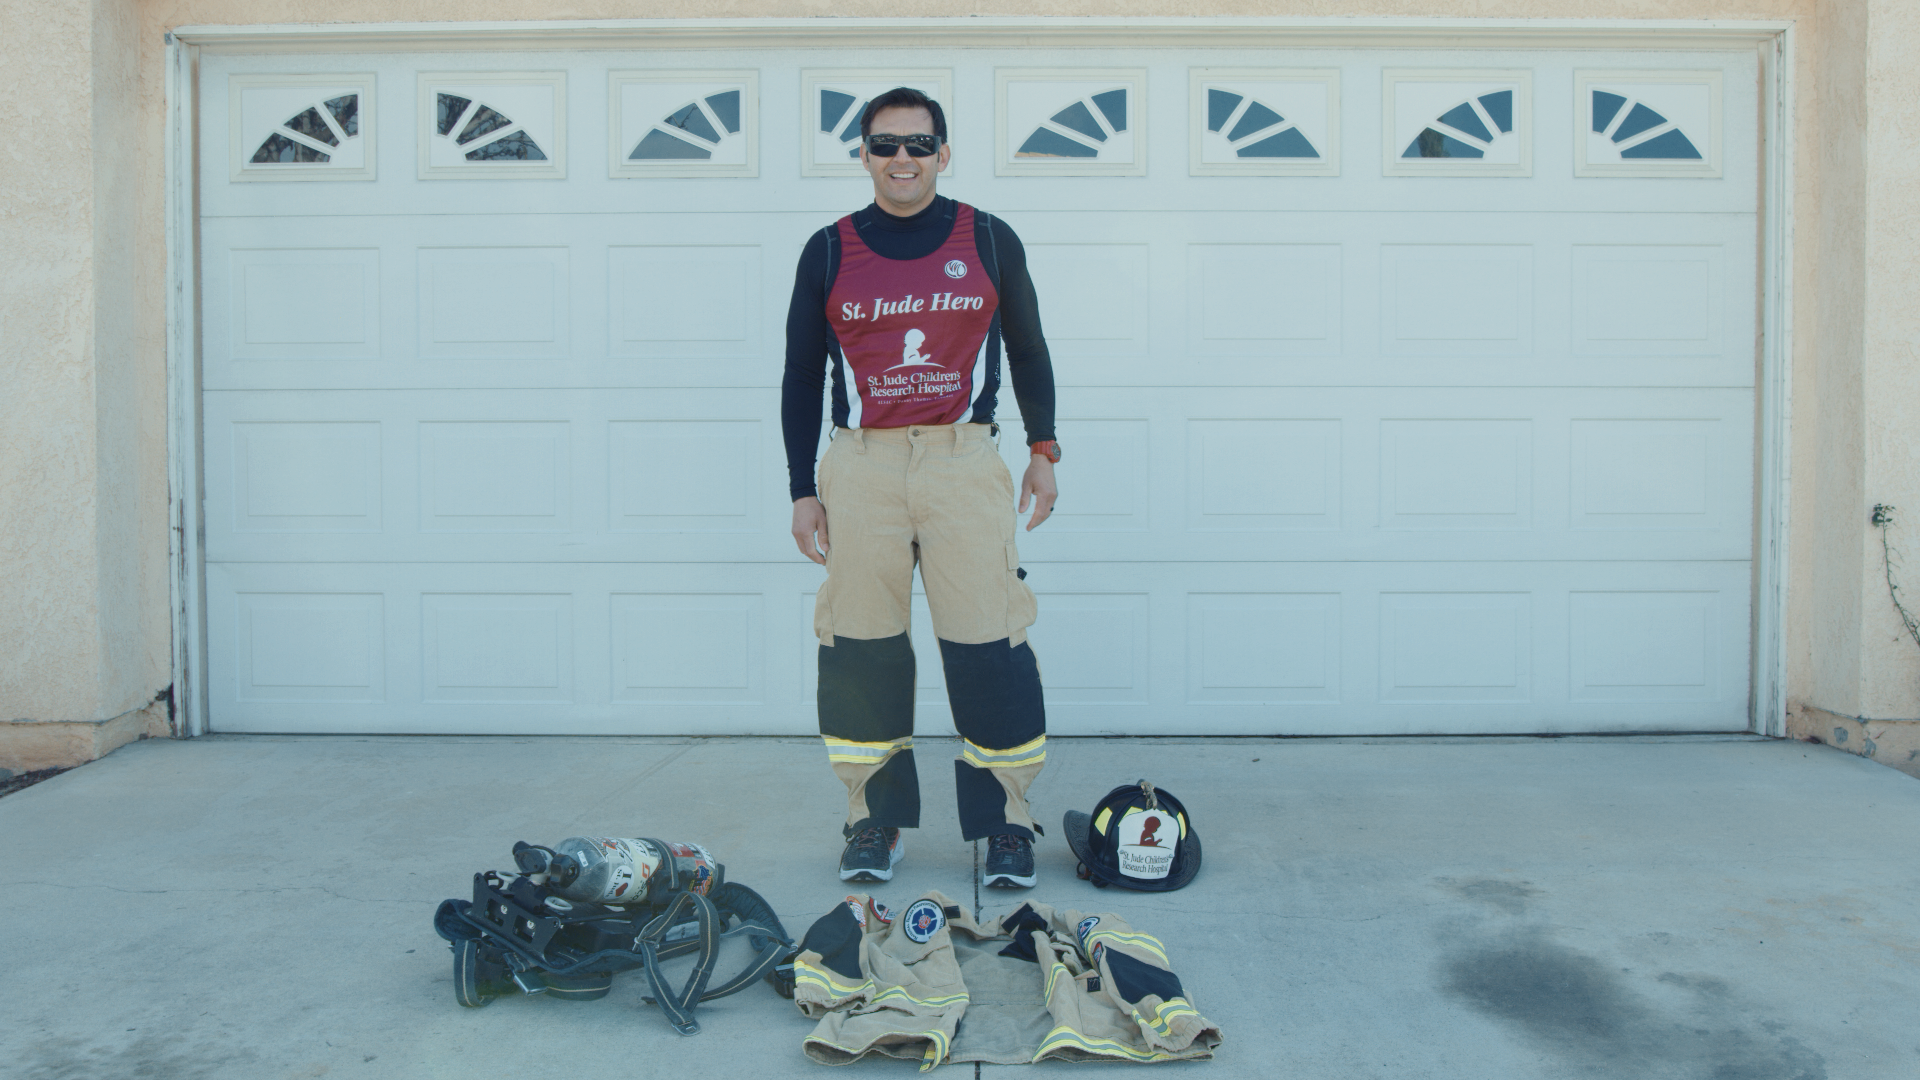 Jose Zambrano demonstrating his firefighter gear.